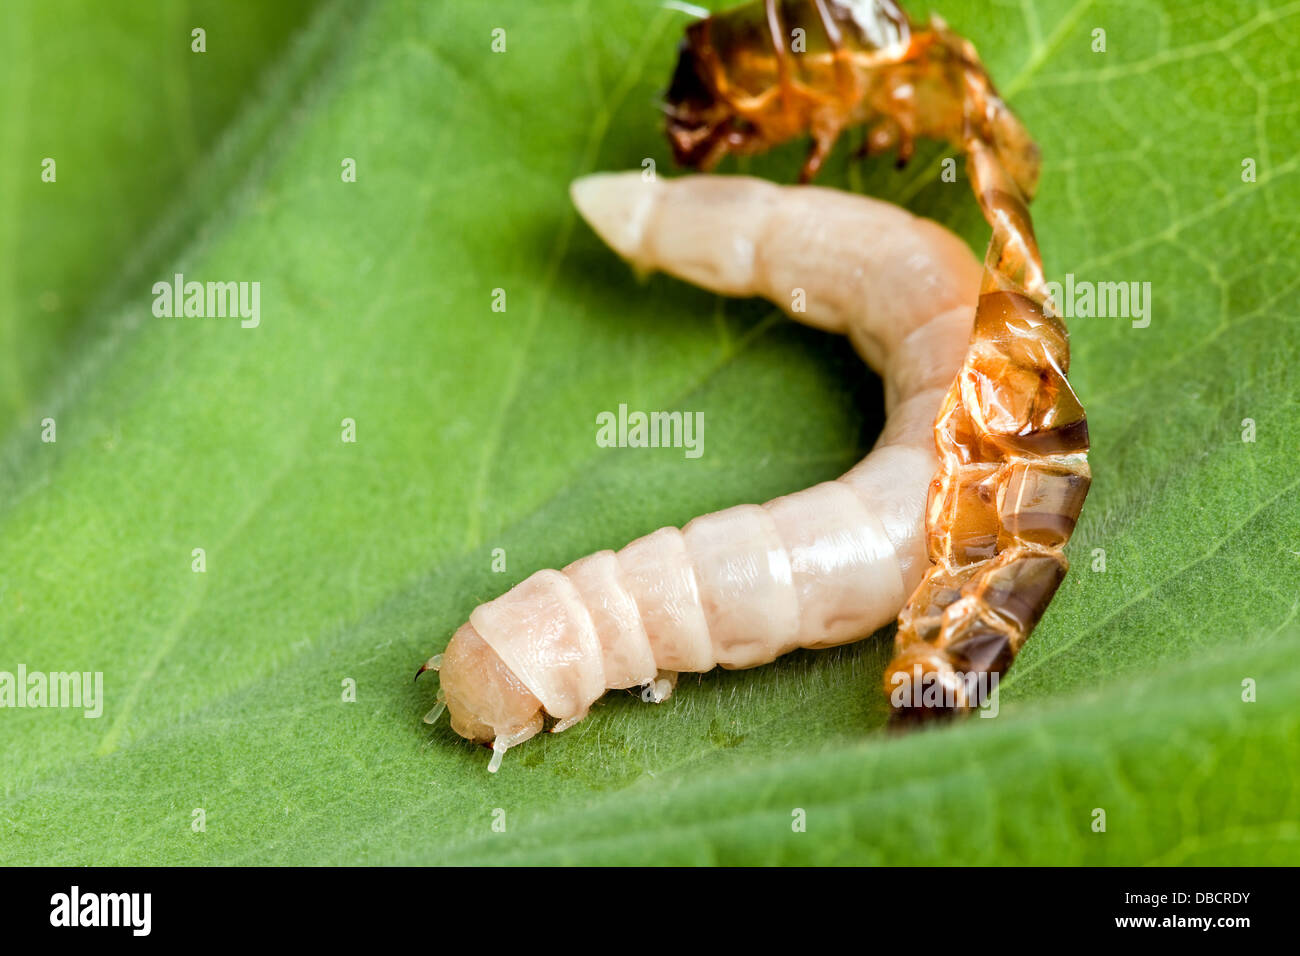 Mealworm or worm reborn after shedding its skin Stock Photo